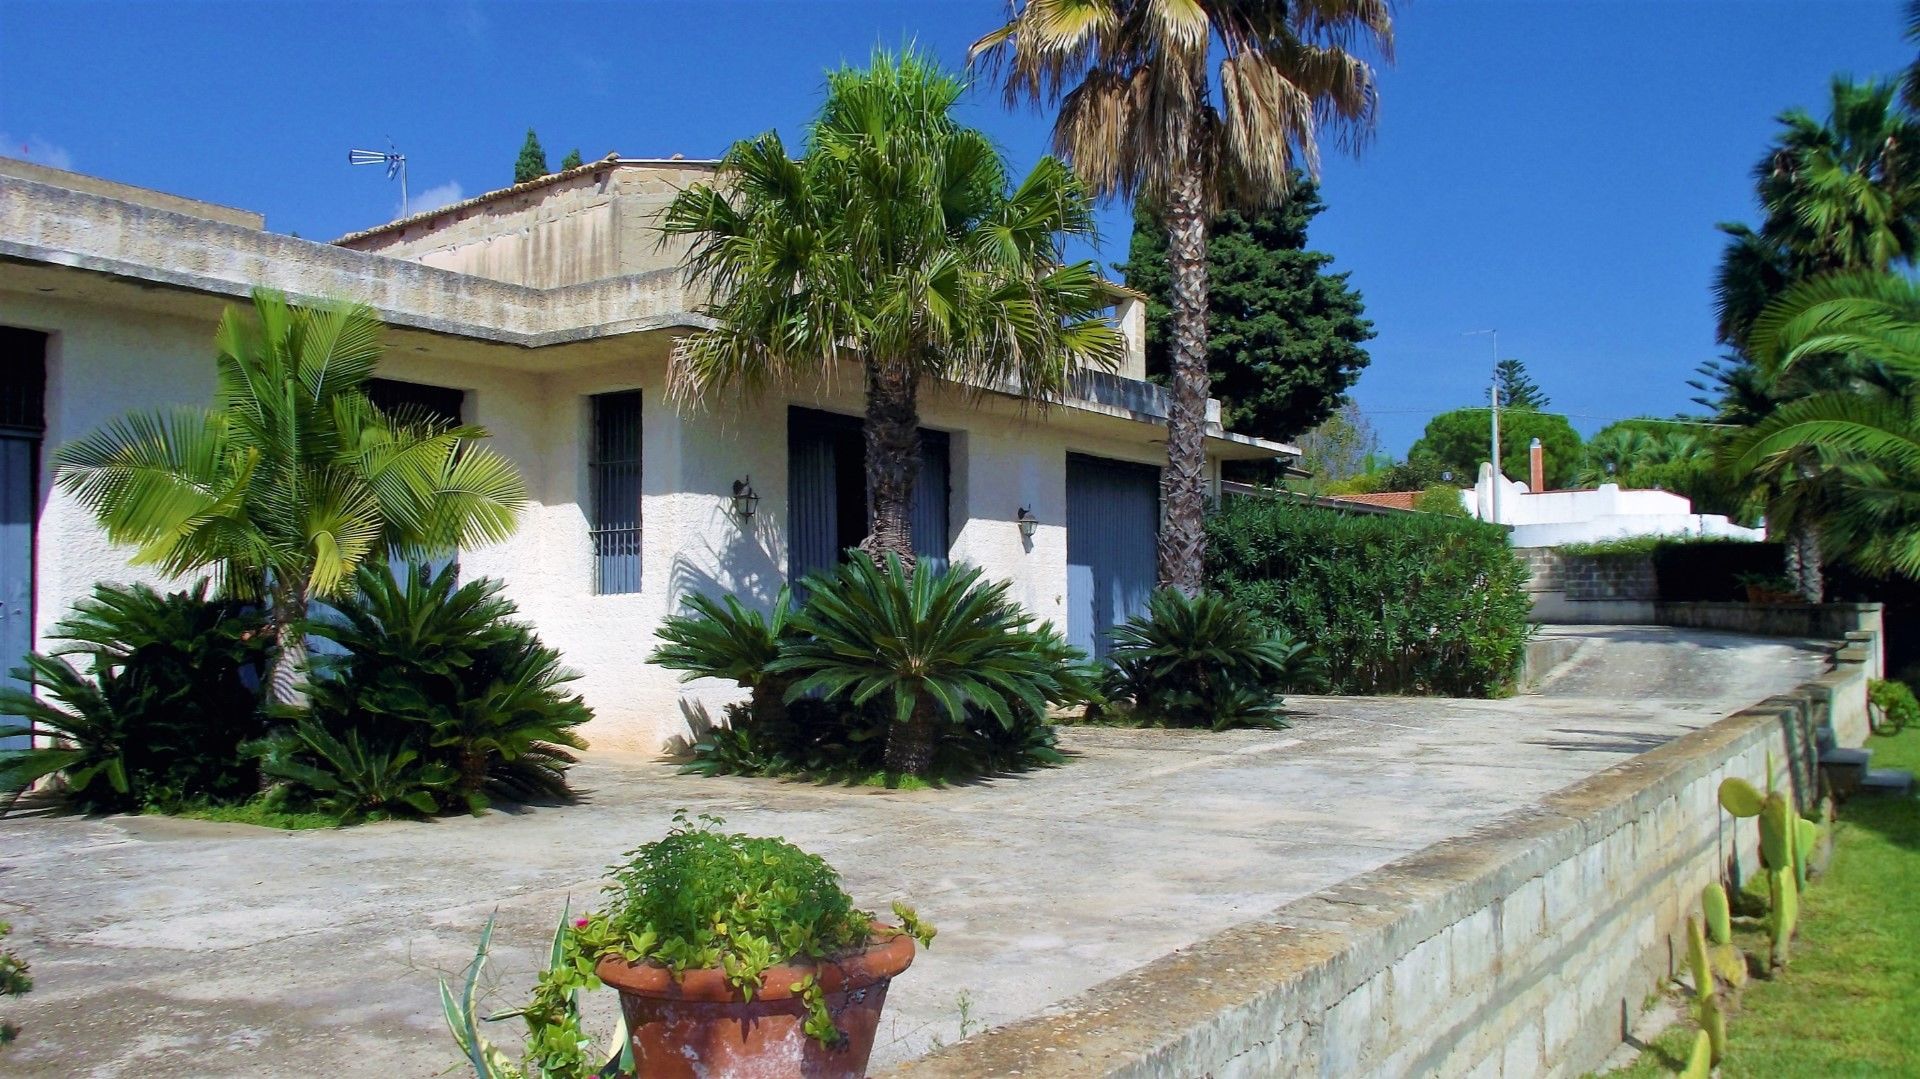 7 bedroom Villa for sale with sea view in Fontane Bianche, Sicily